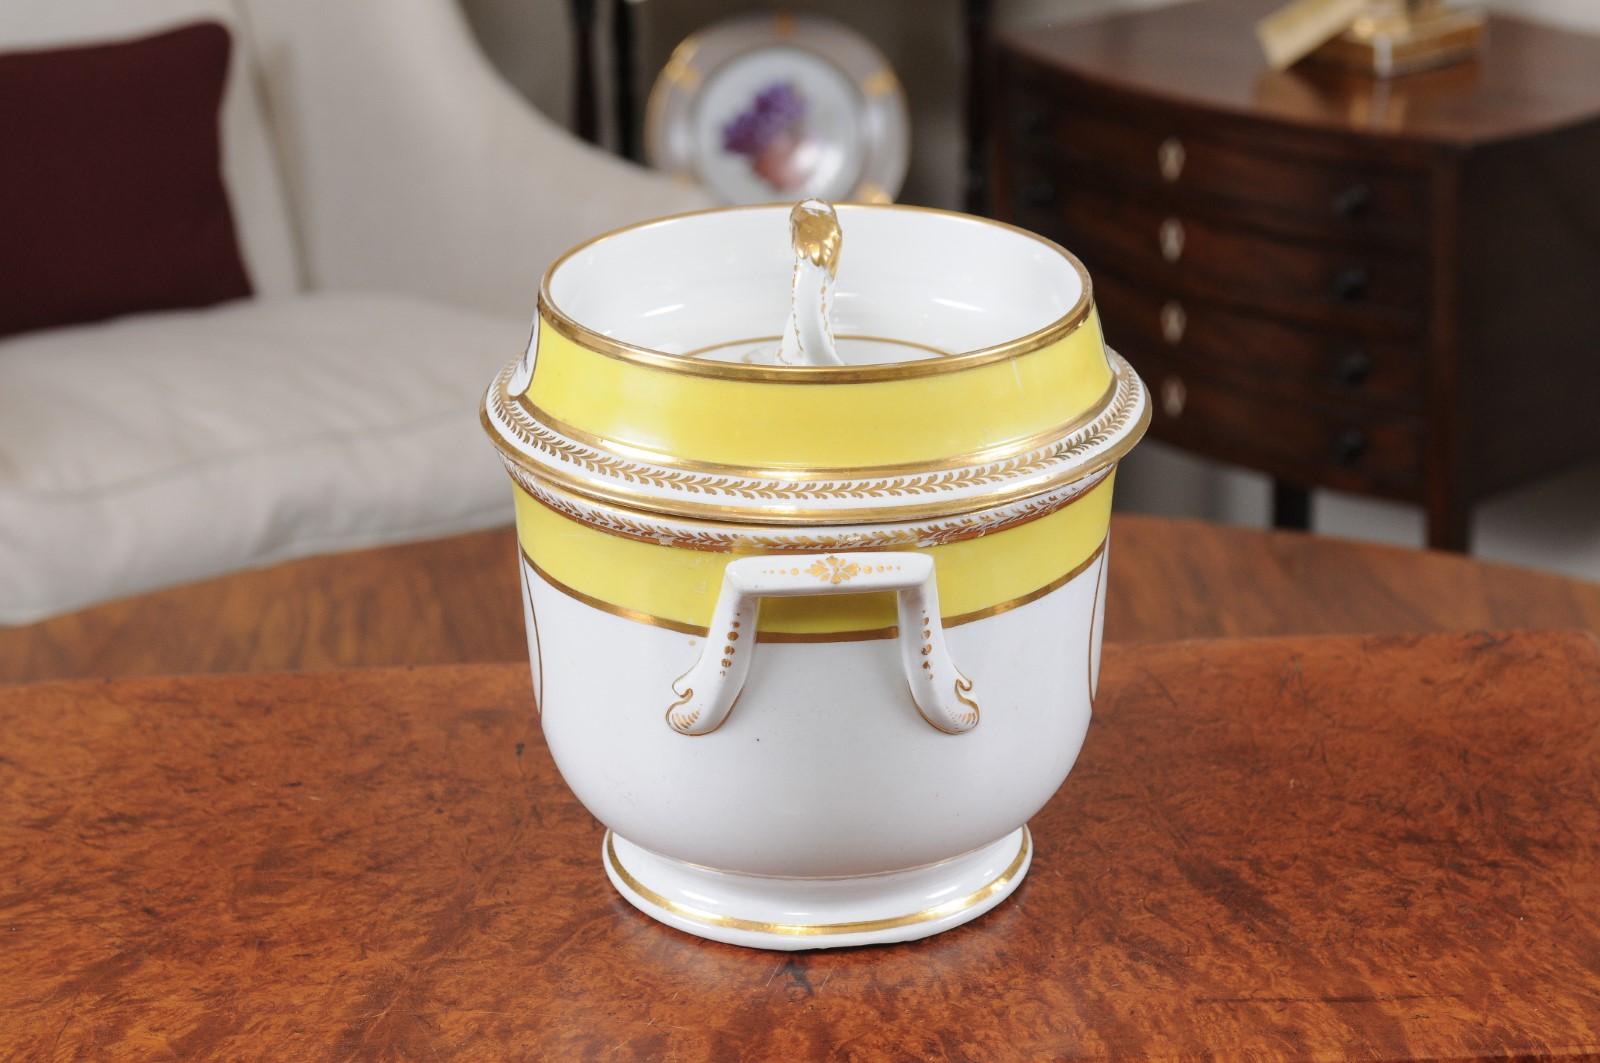 19th Century English Porcelain Armorial Fruit Cooler with Yellow Band
